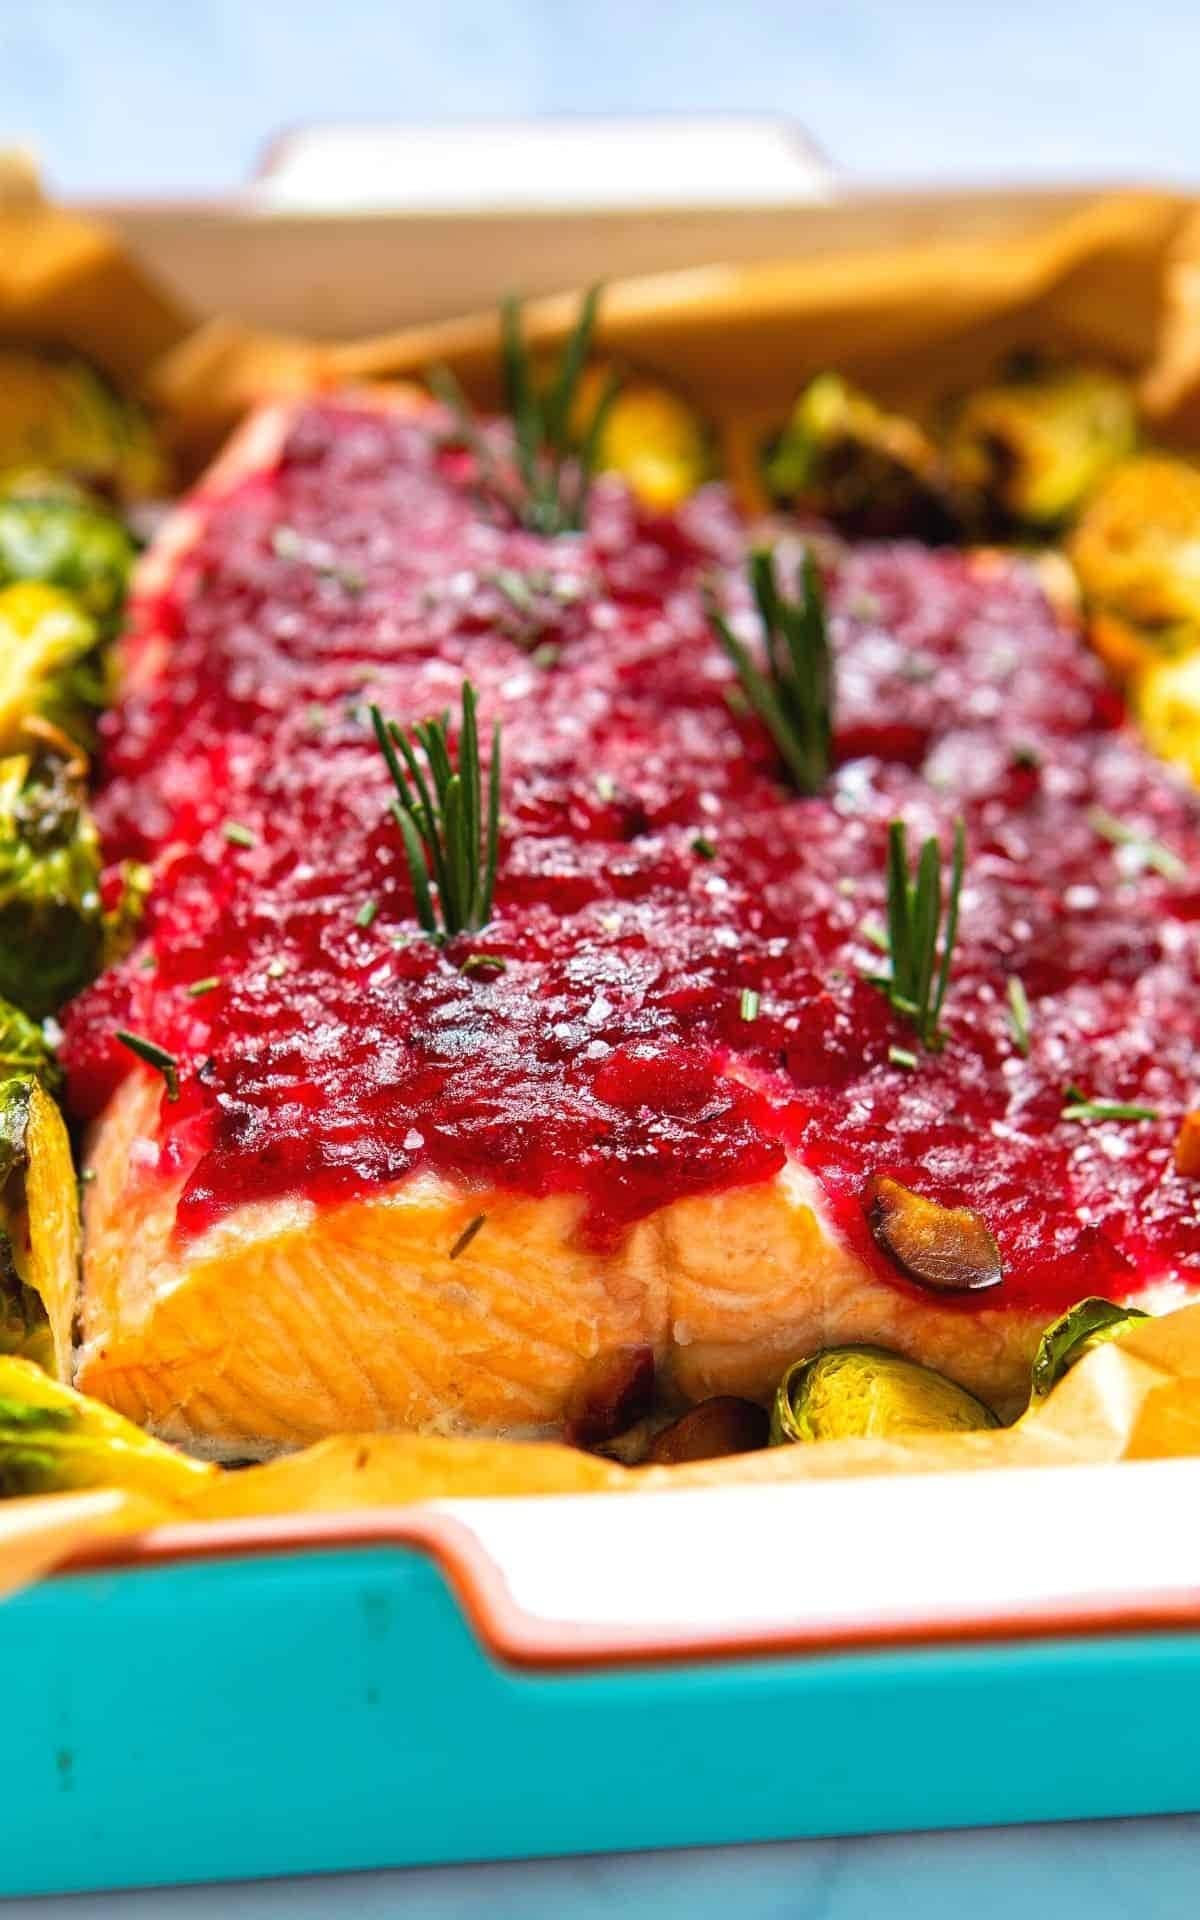 Baked salmon topped with cranberry sauce.